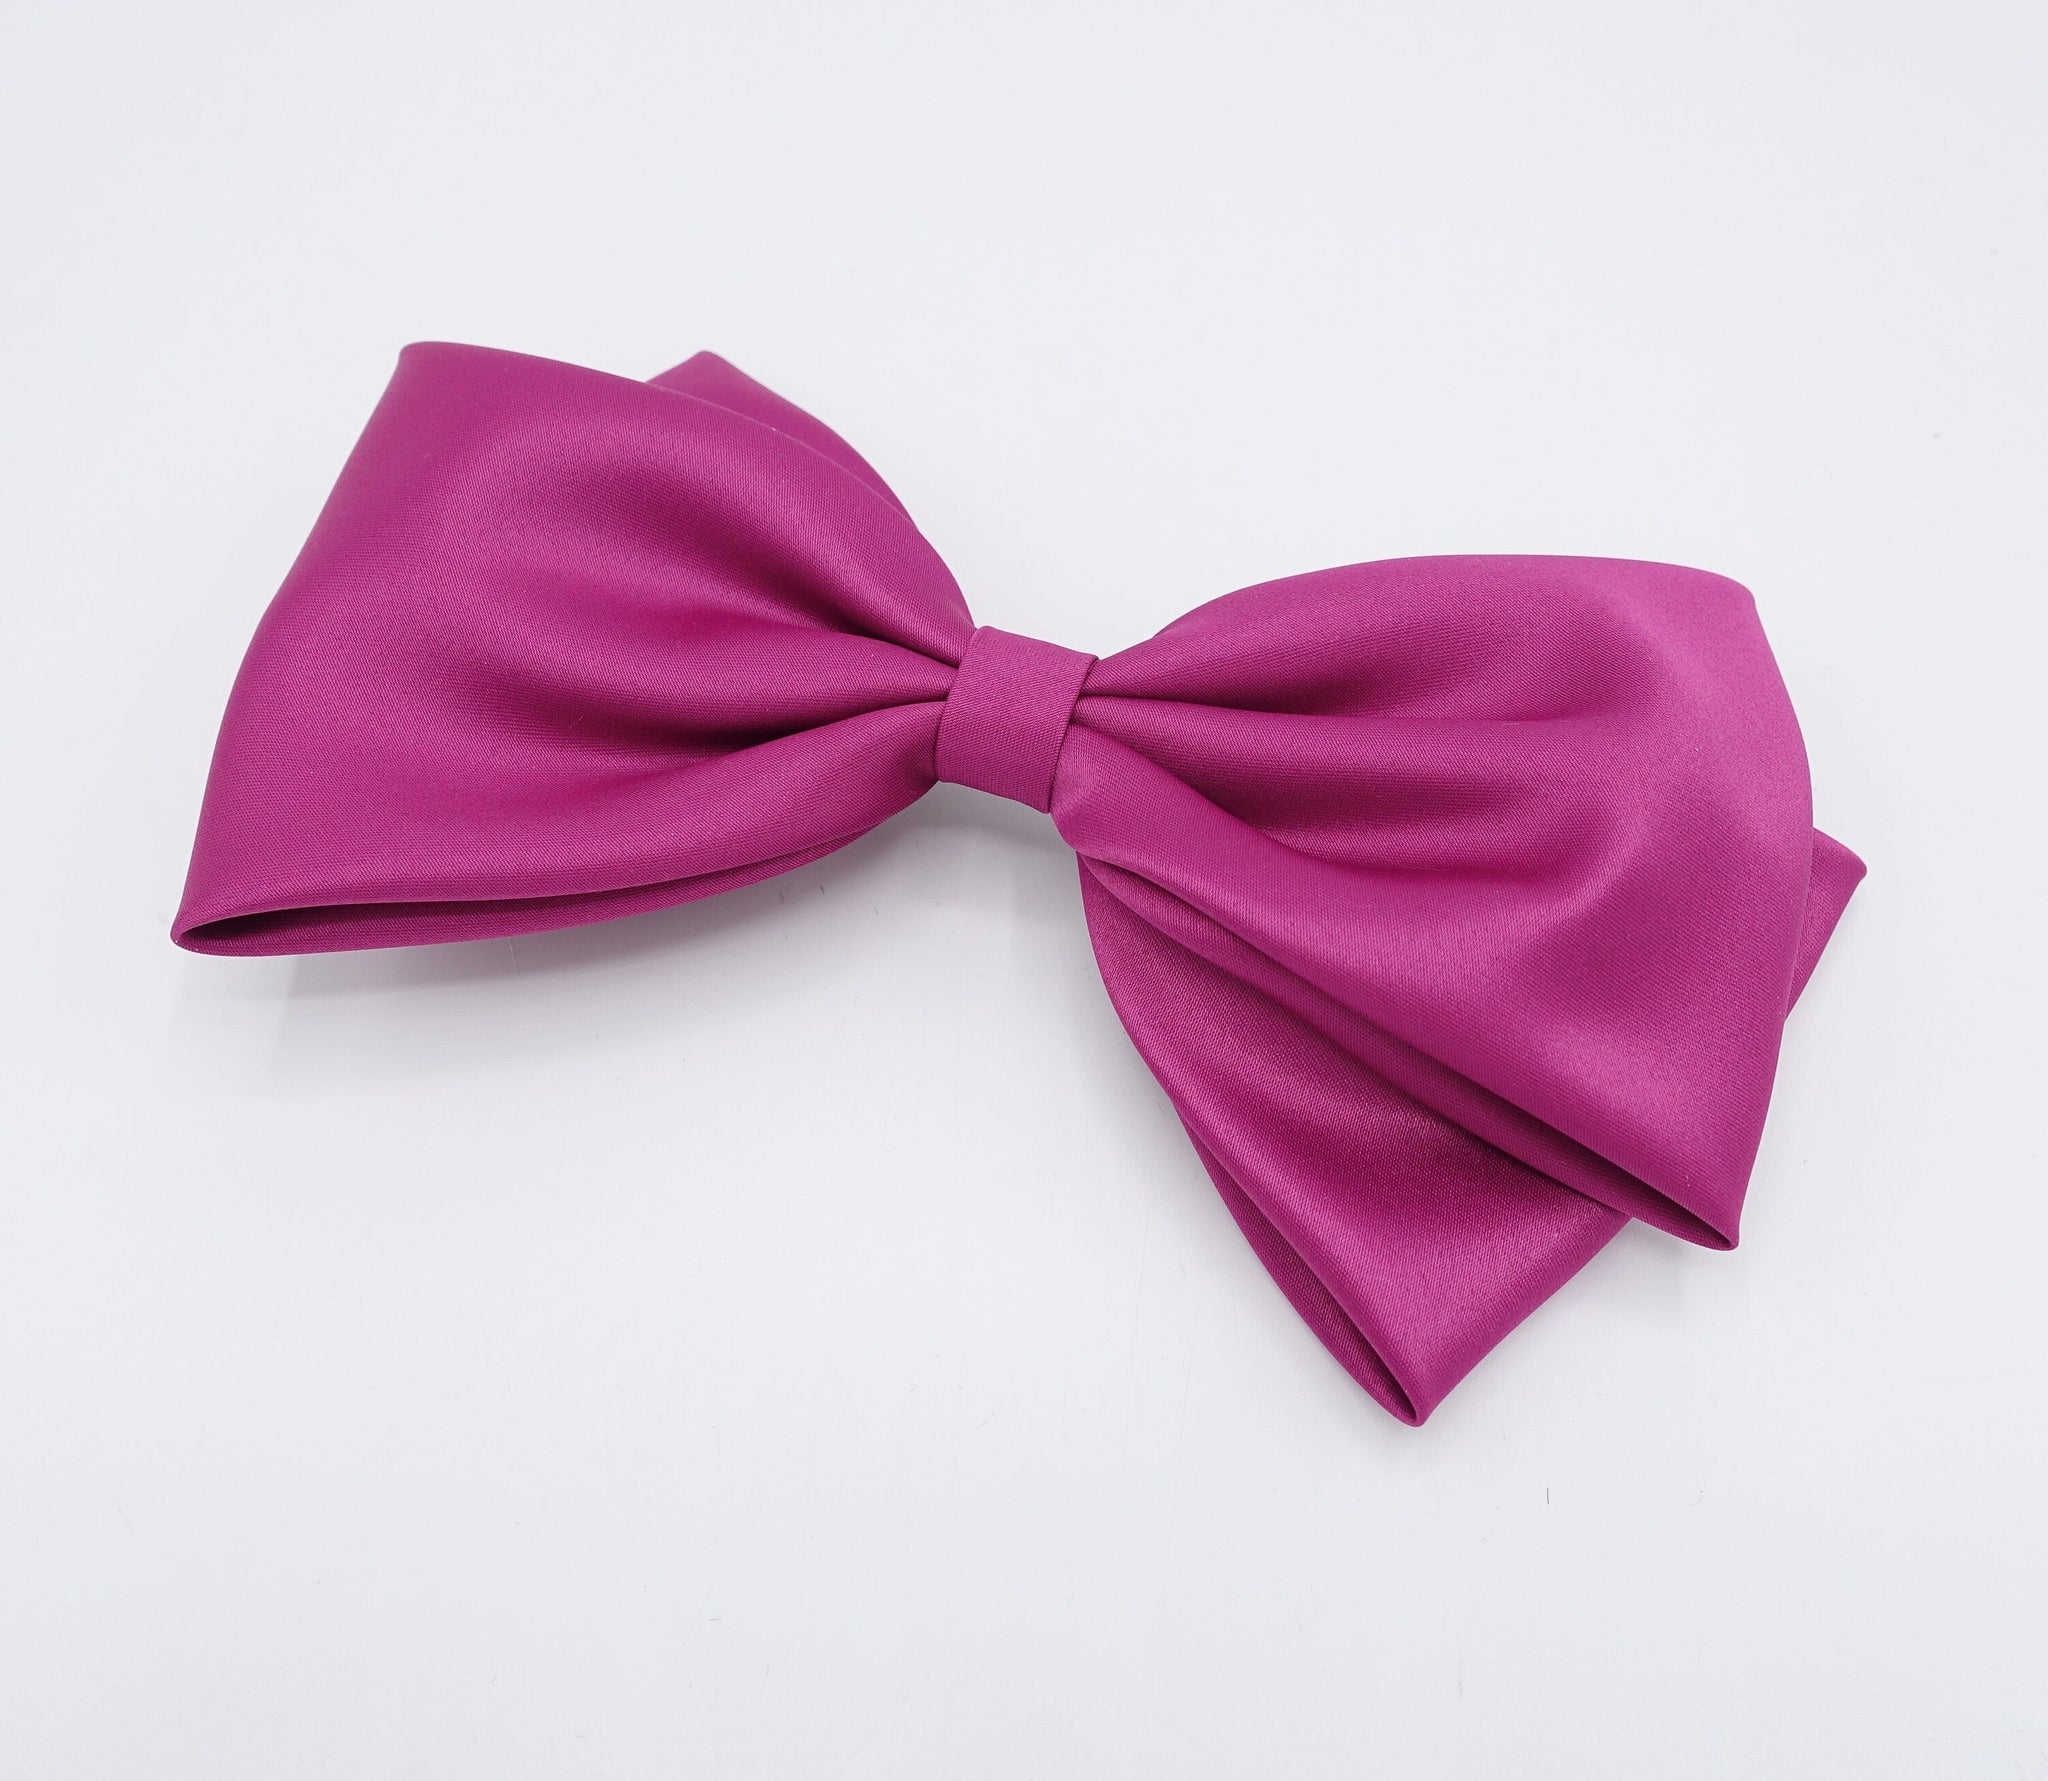 veryshine.com Barrette (Bow) Hot pink large satin hair bow, basic style hair bow for women